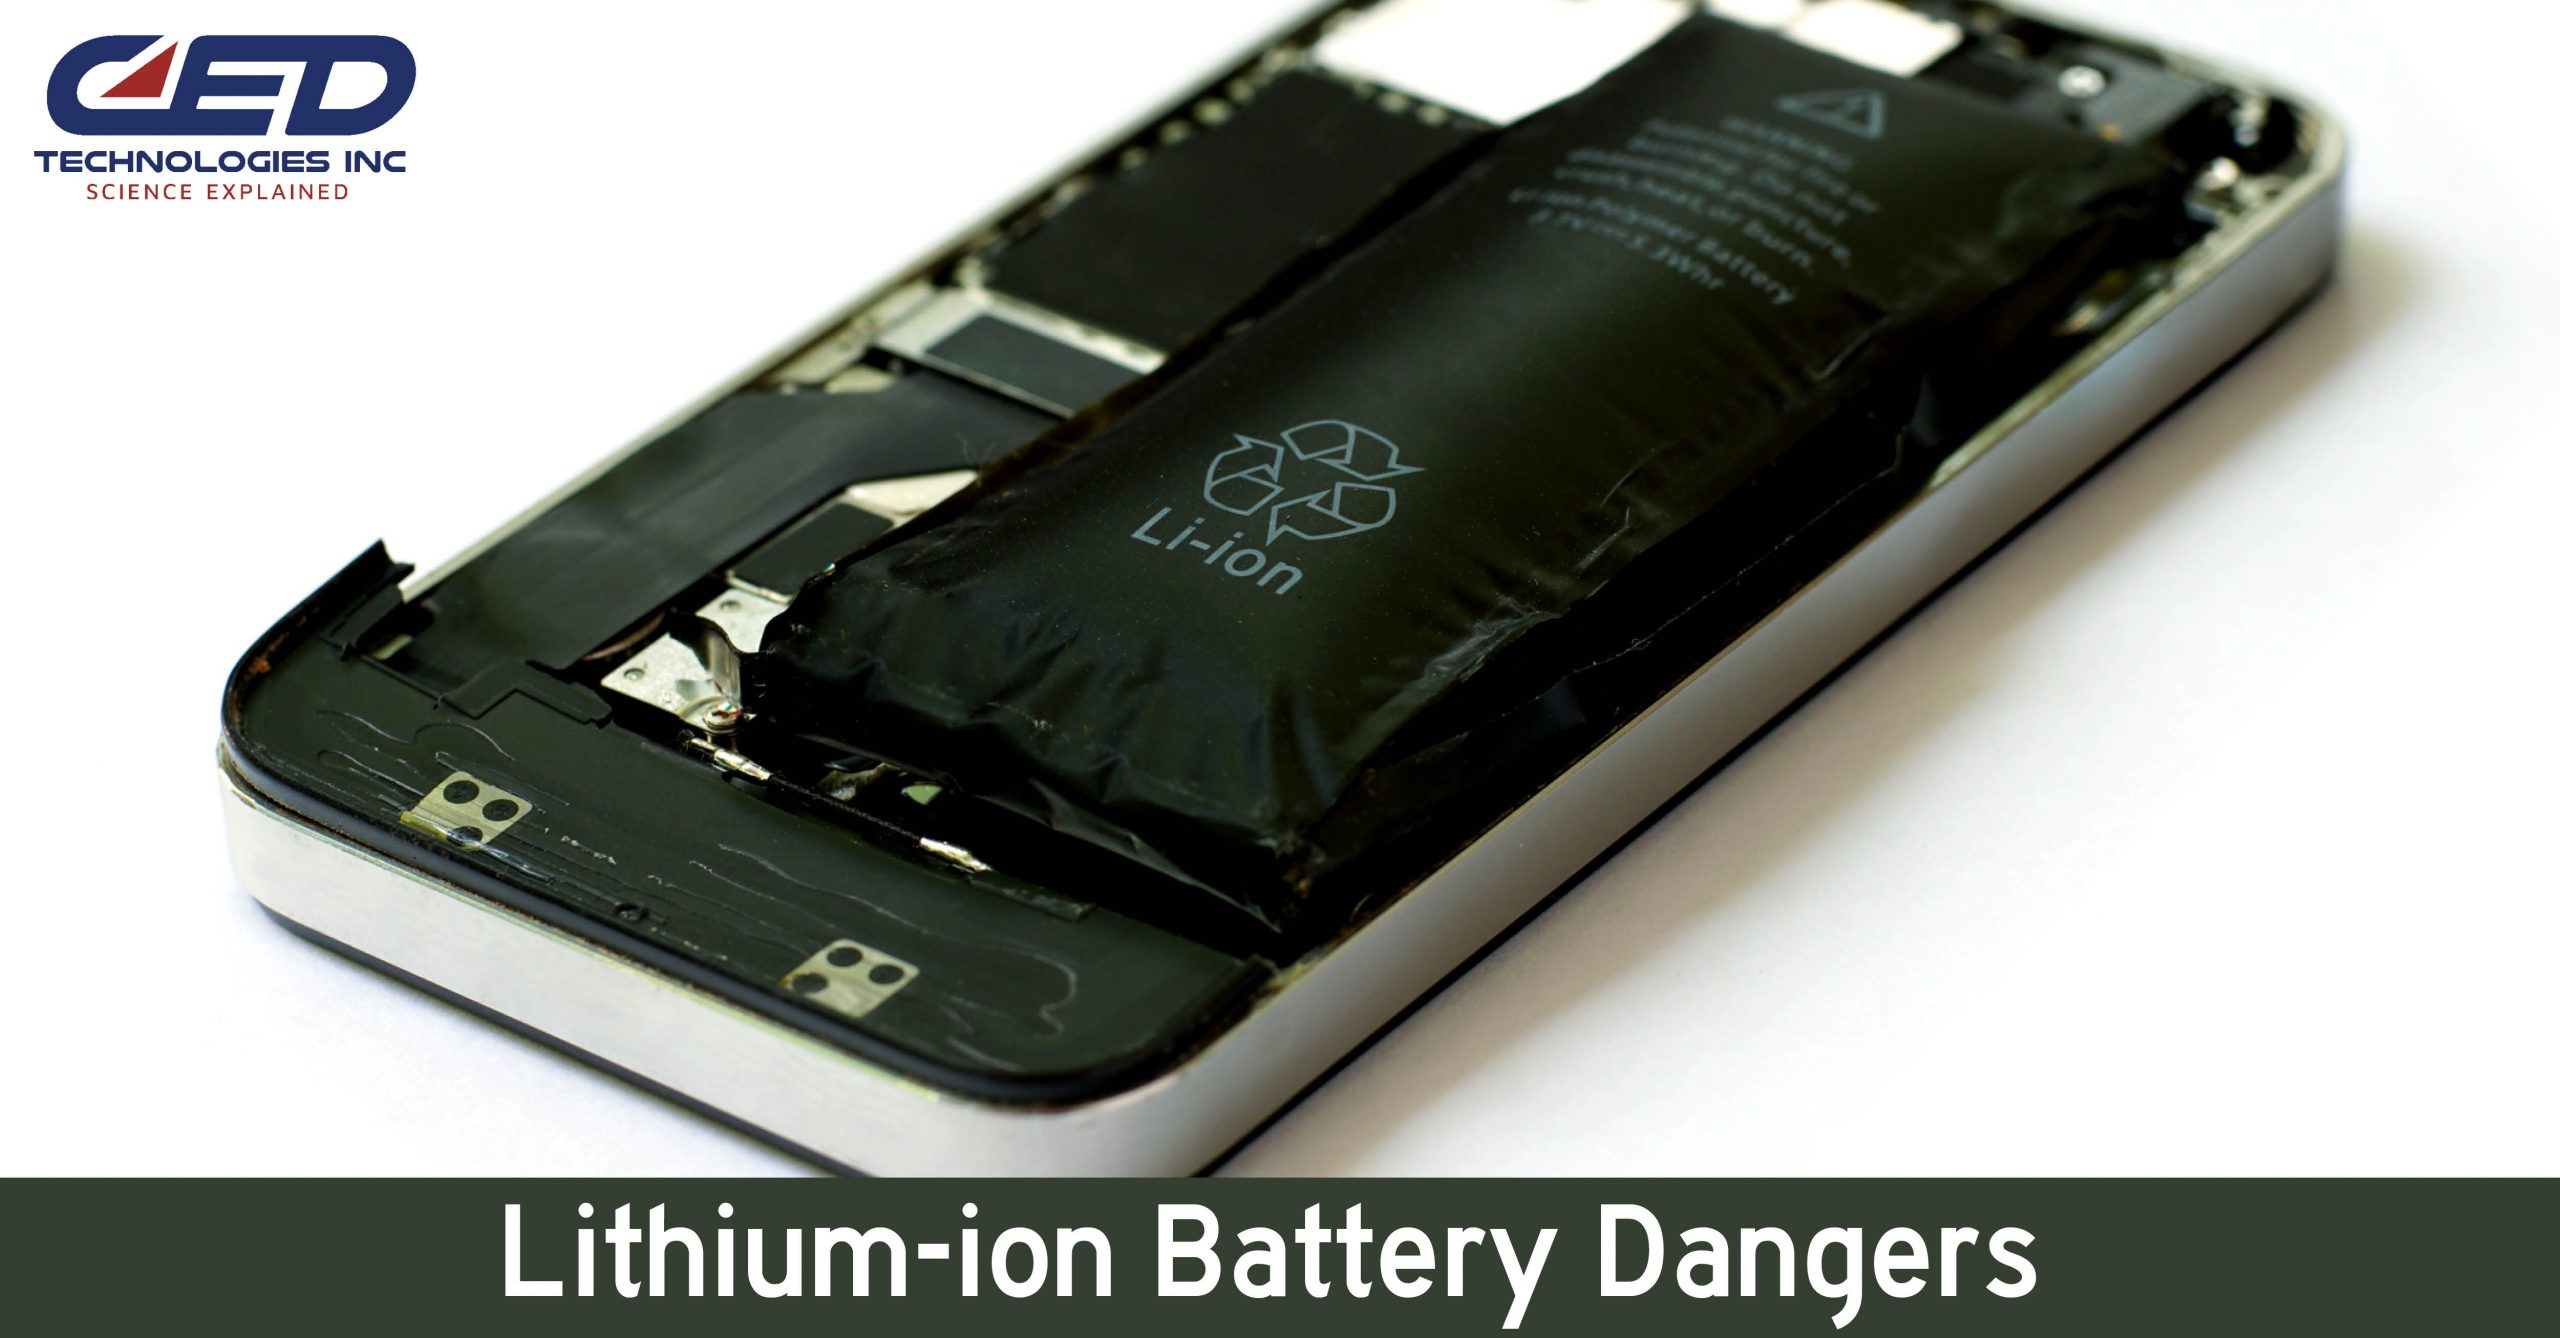 Convenience and Danger: Lithium-ion Batteries